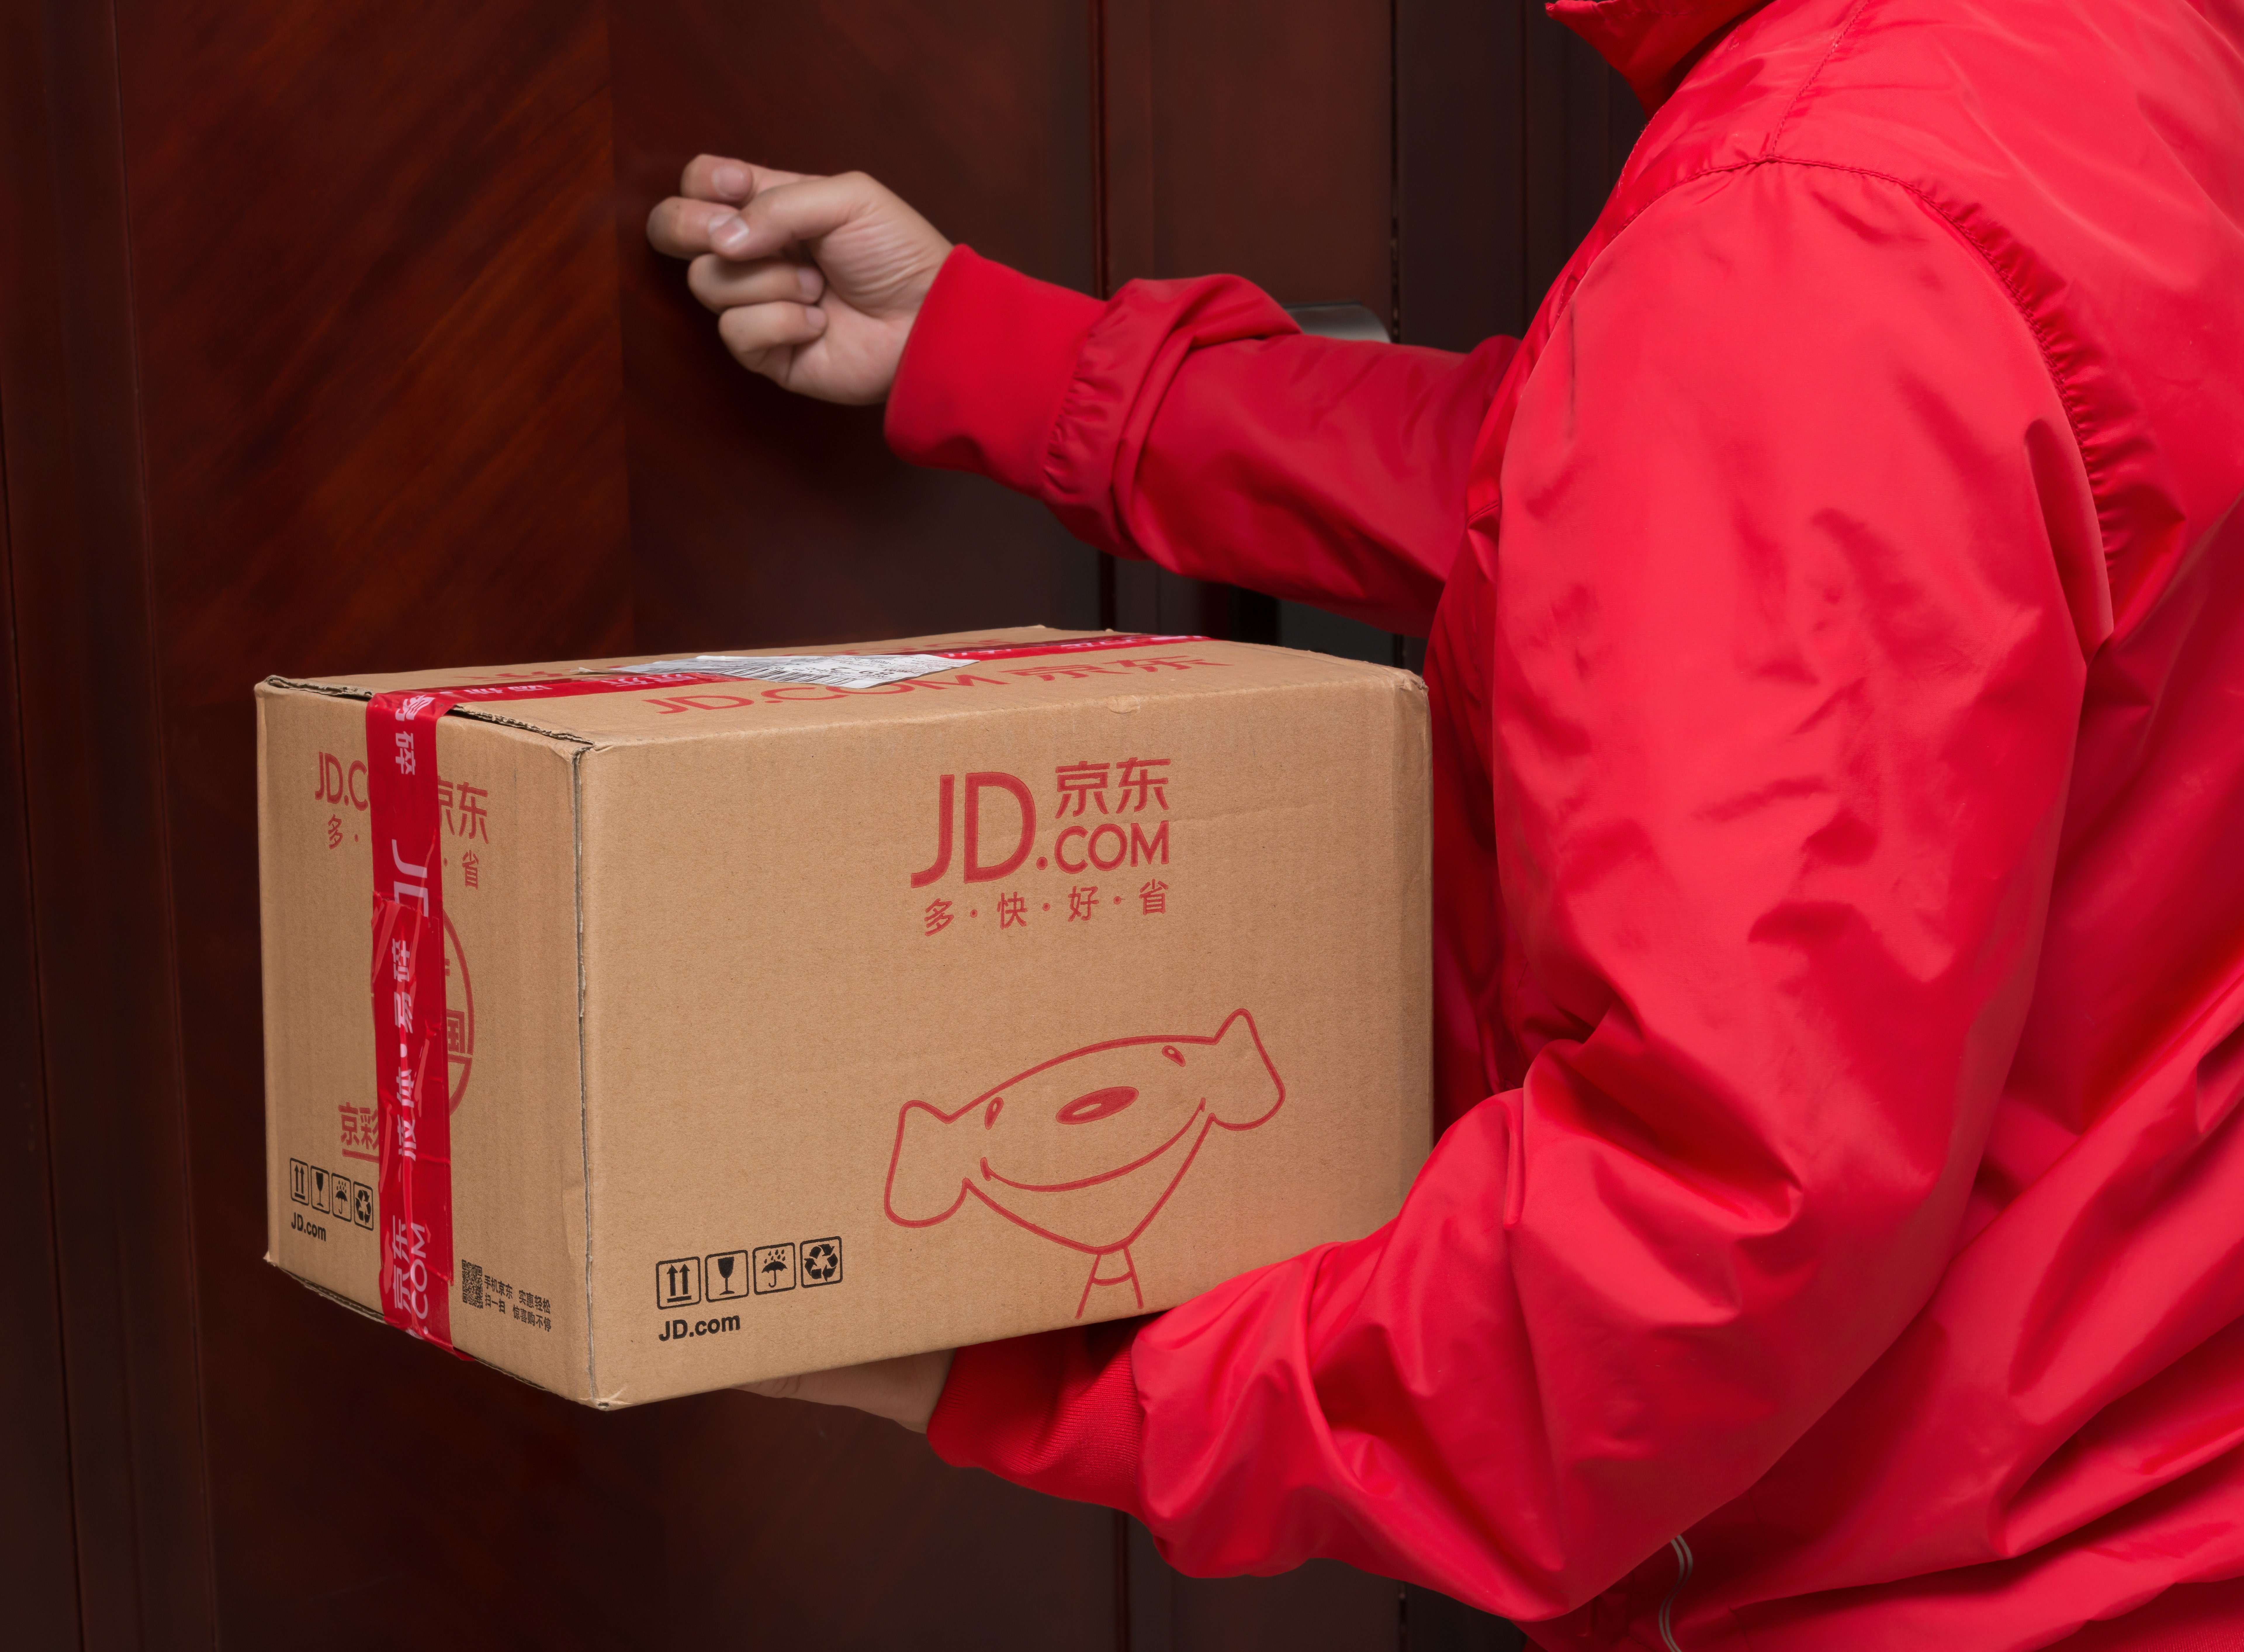 JD.com Options Trades Suggest More Gains To Come